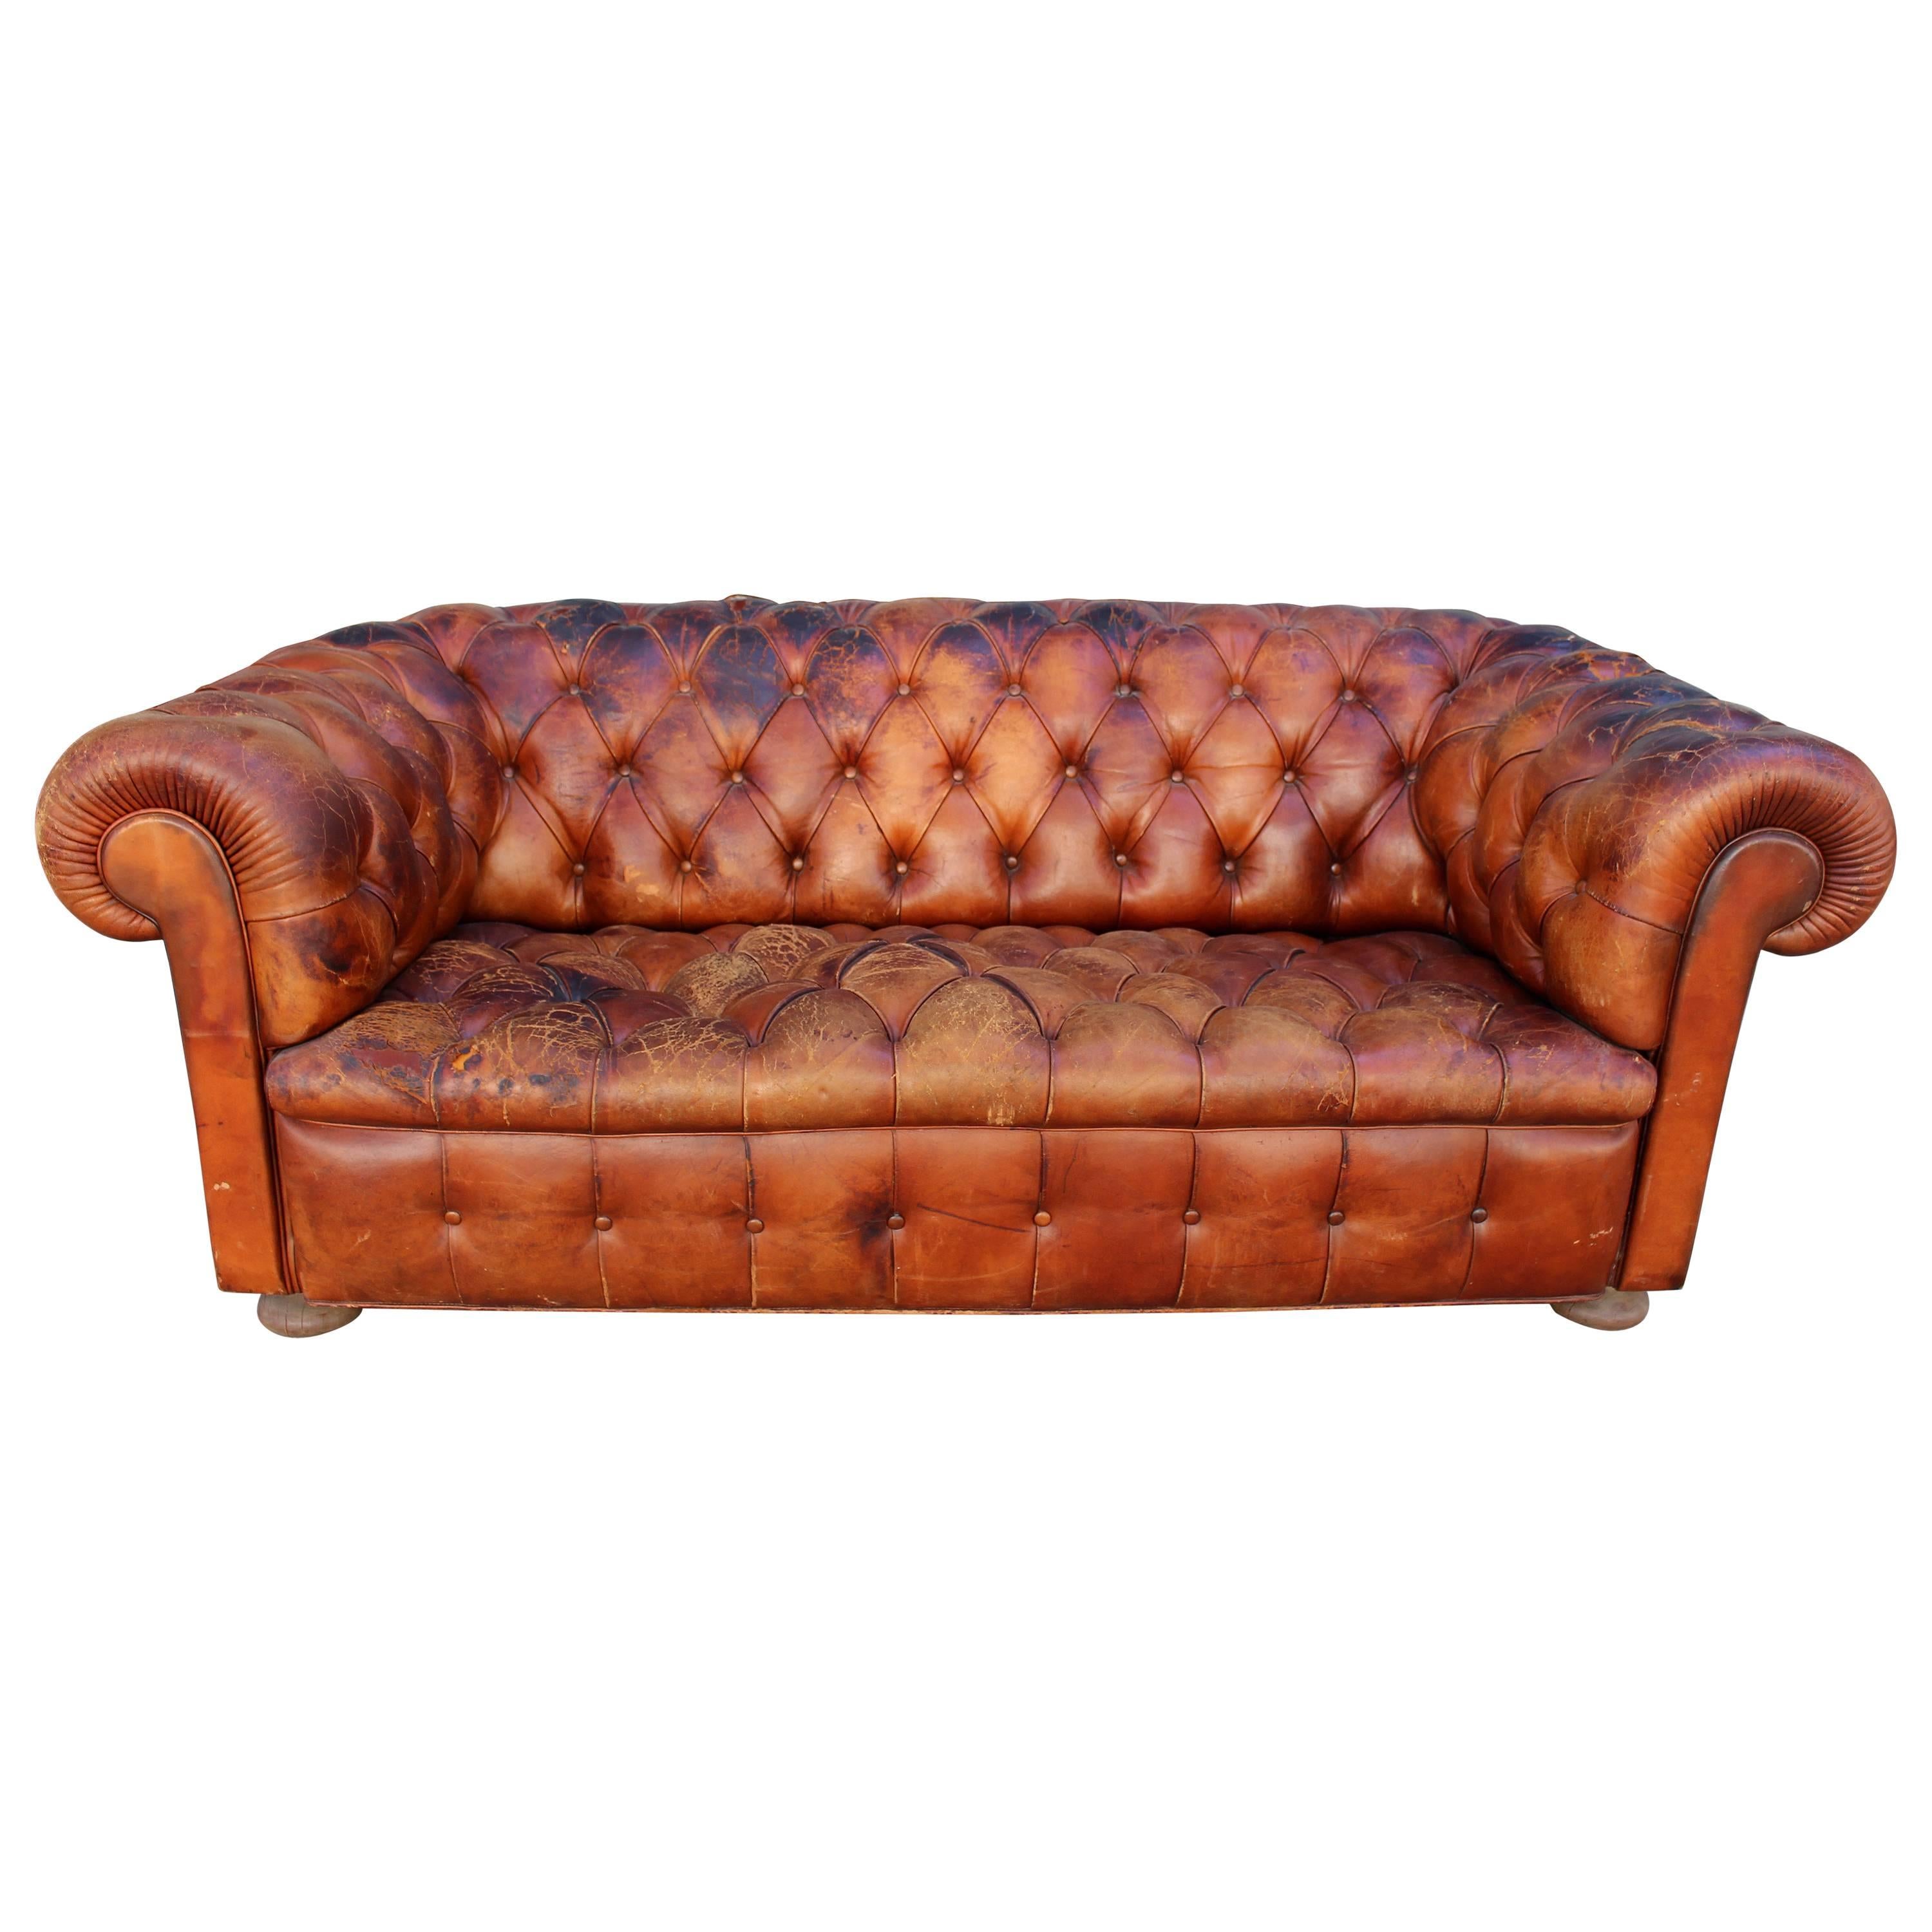 Antique Chesterfield Couch